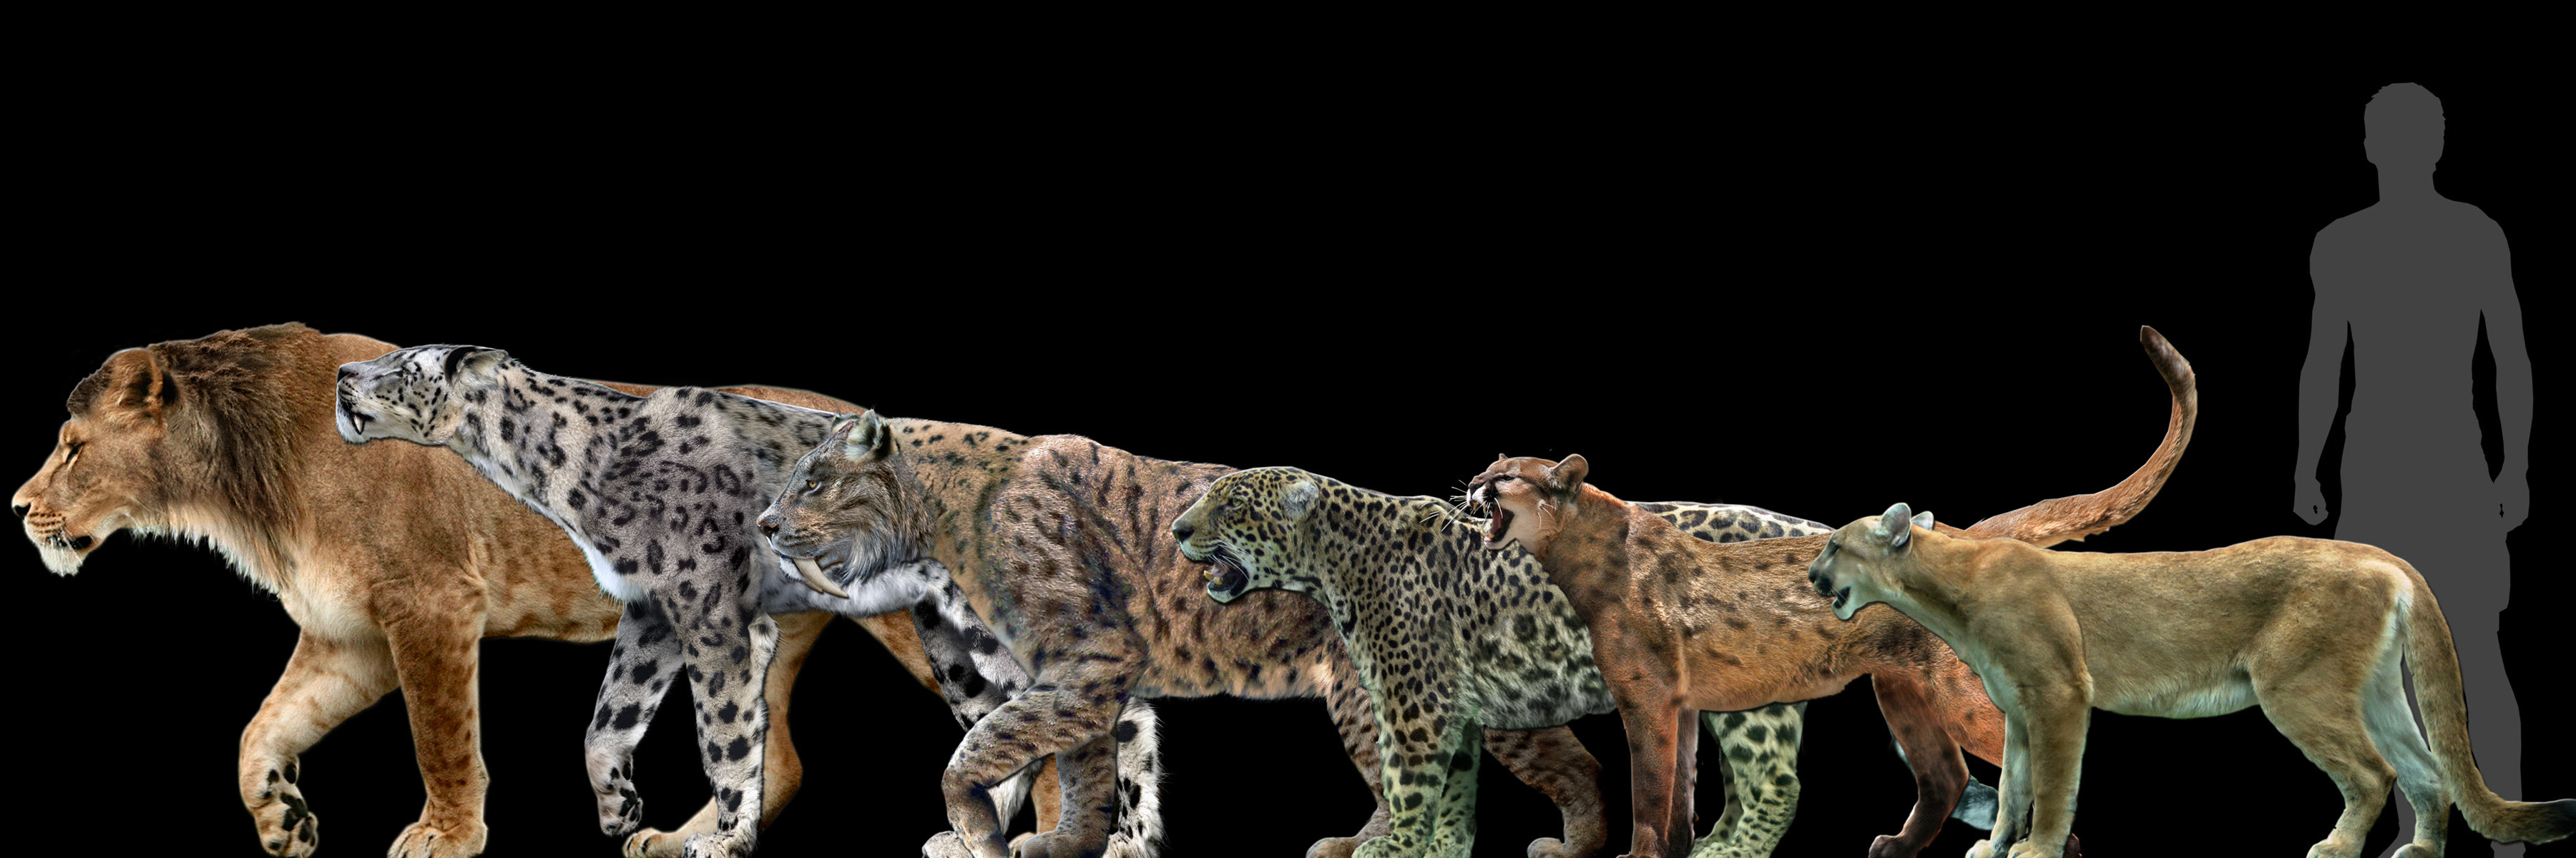 Big cats... into big poster? by Dantheman9758